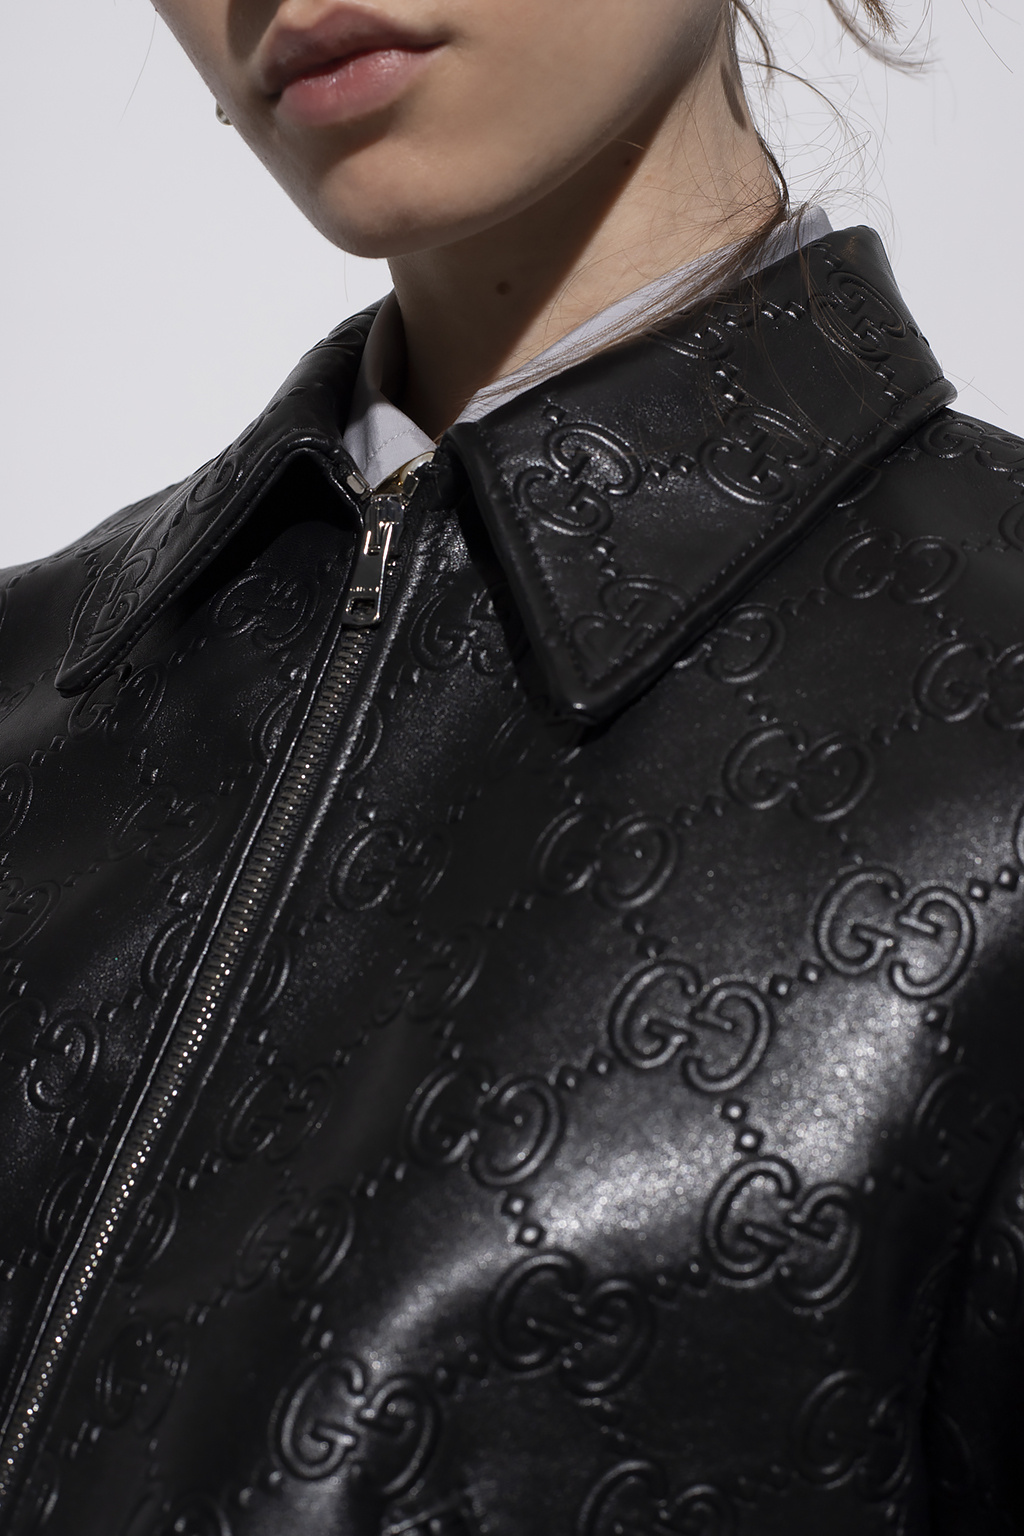 Gucci Embossed GG Leather Jacket